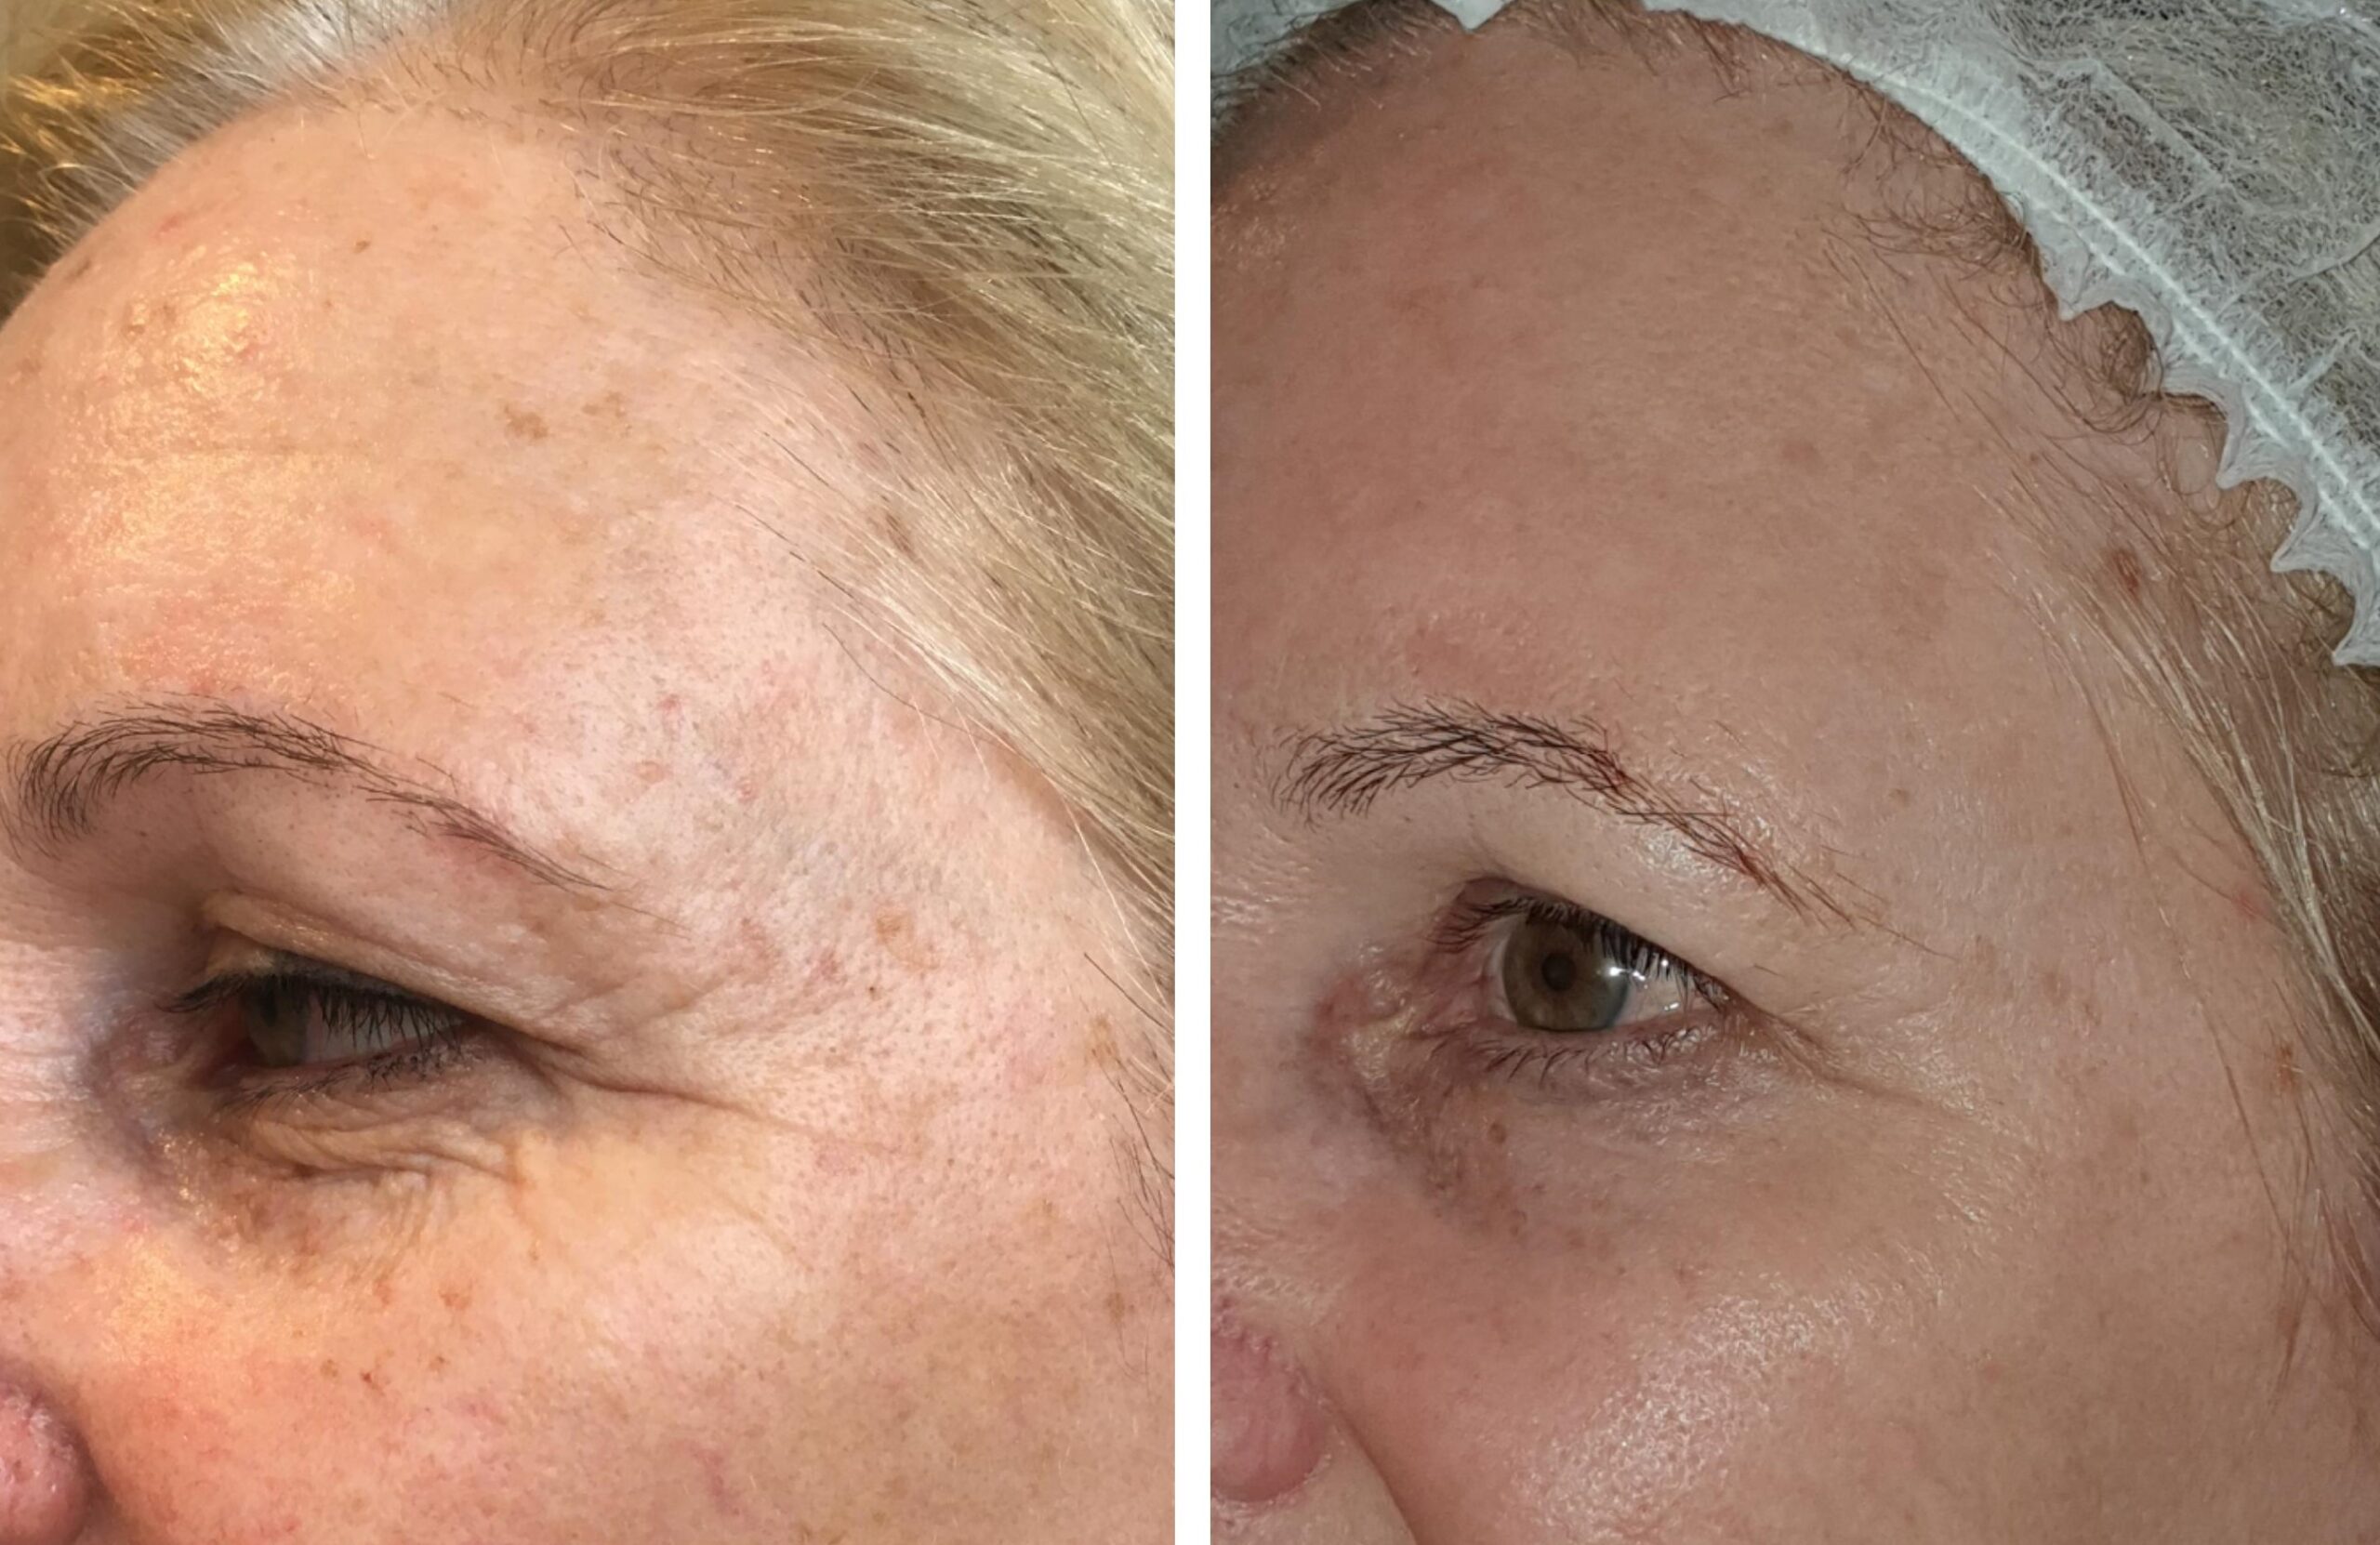 Before After Plasmage eye lift scaled